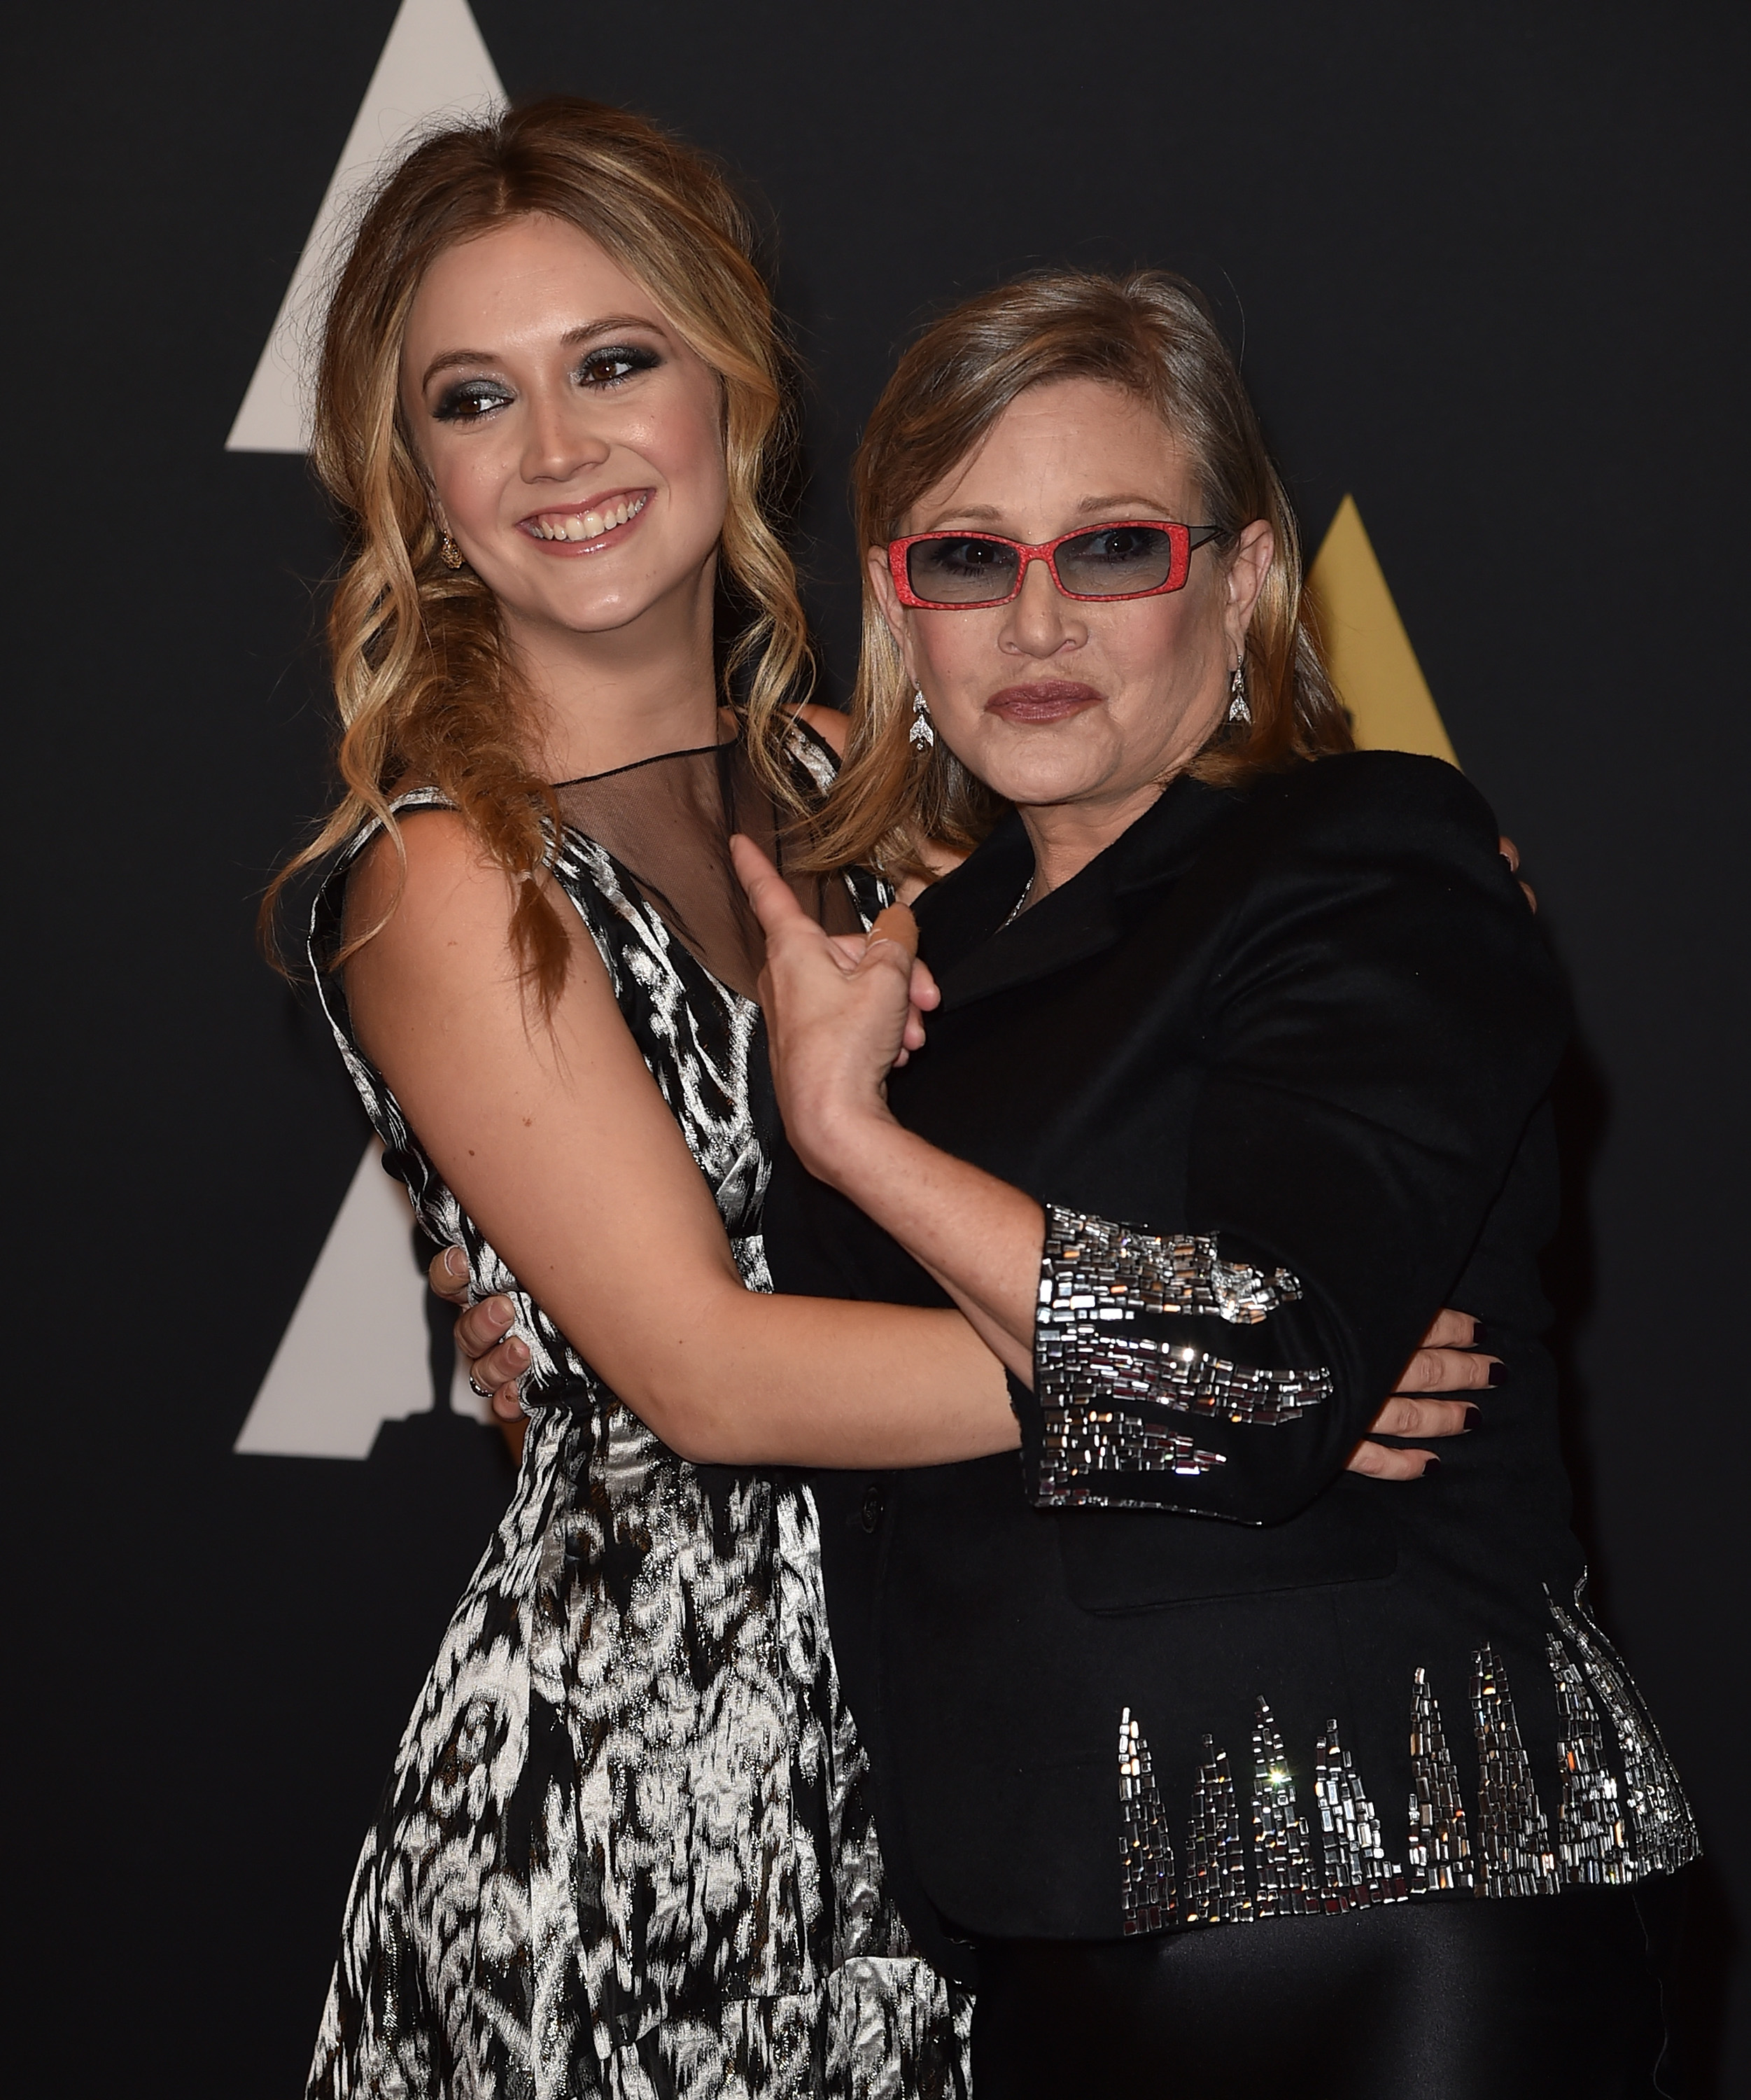 Carrie Fisher and Billie Catherine Lourd on November 14, 2015 in Hollywood, California. | Source: Getty Images